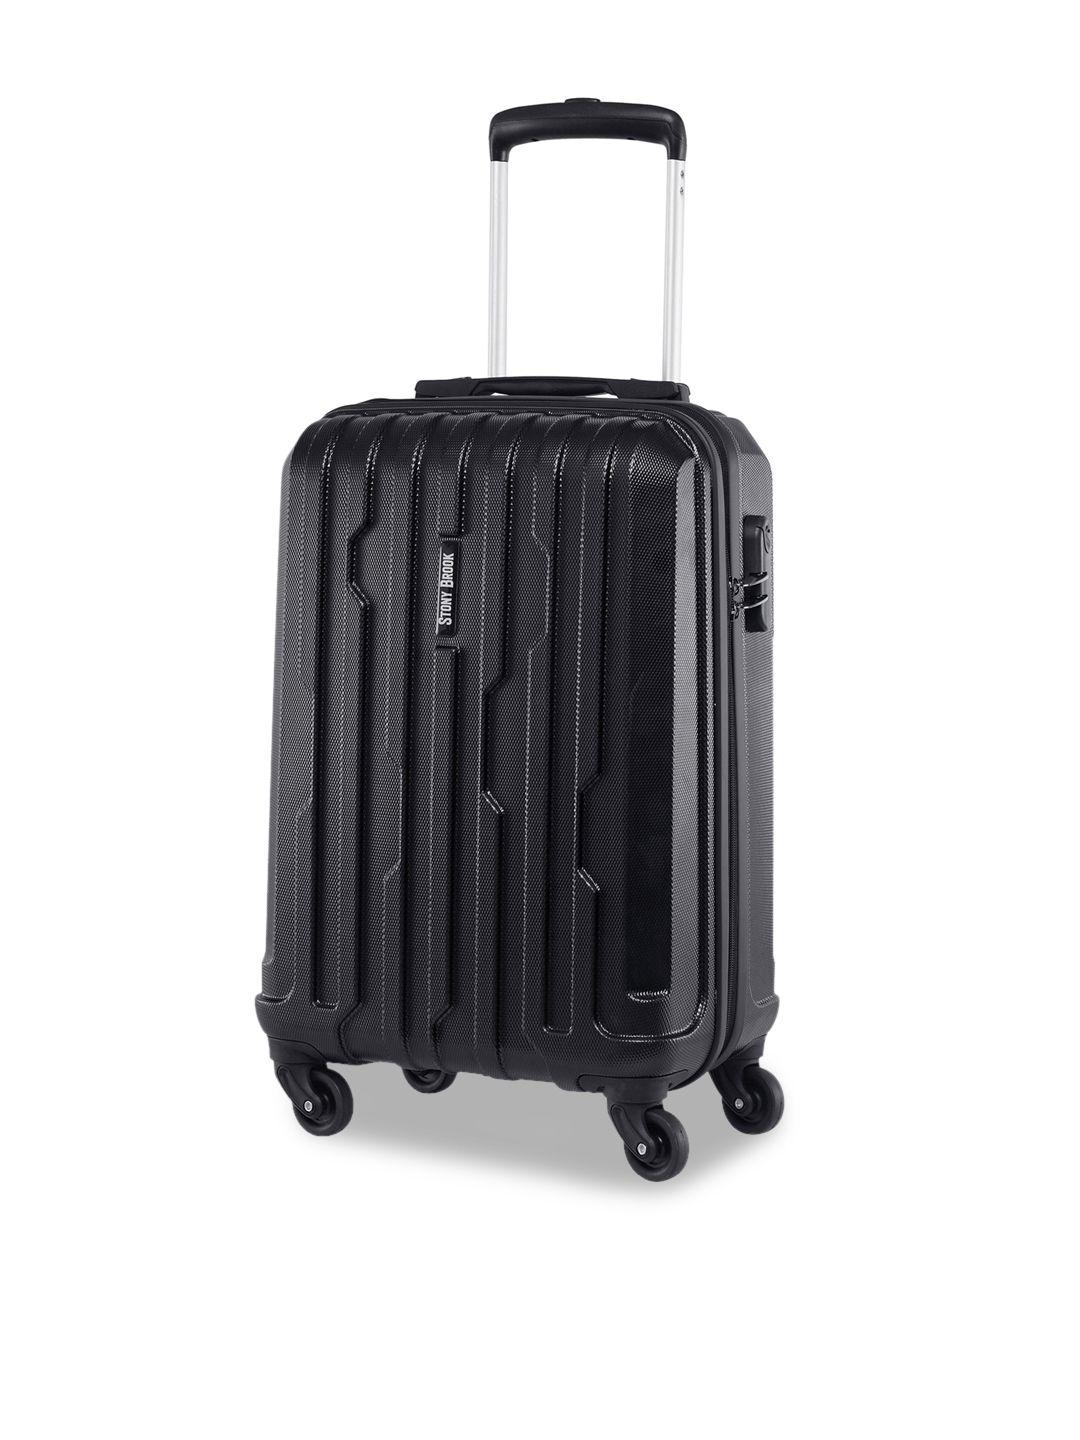 stony brook by nasher miles textured hard-sided cabin trolley bag